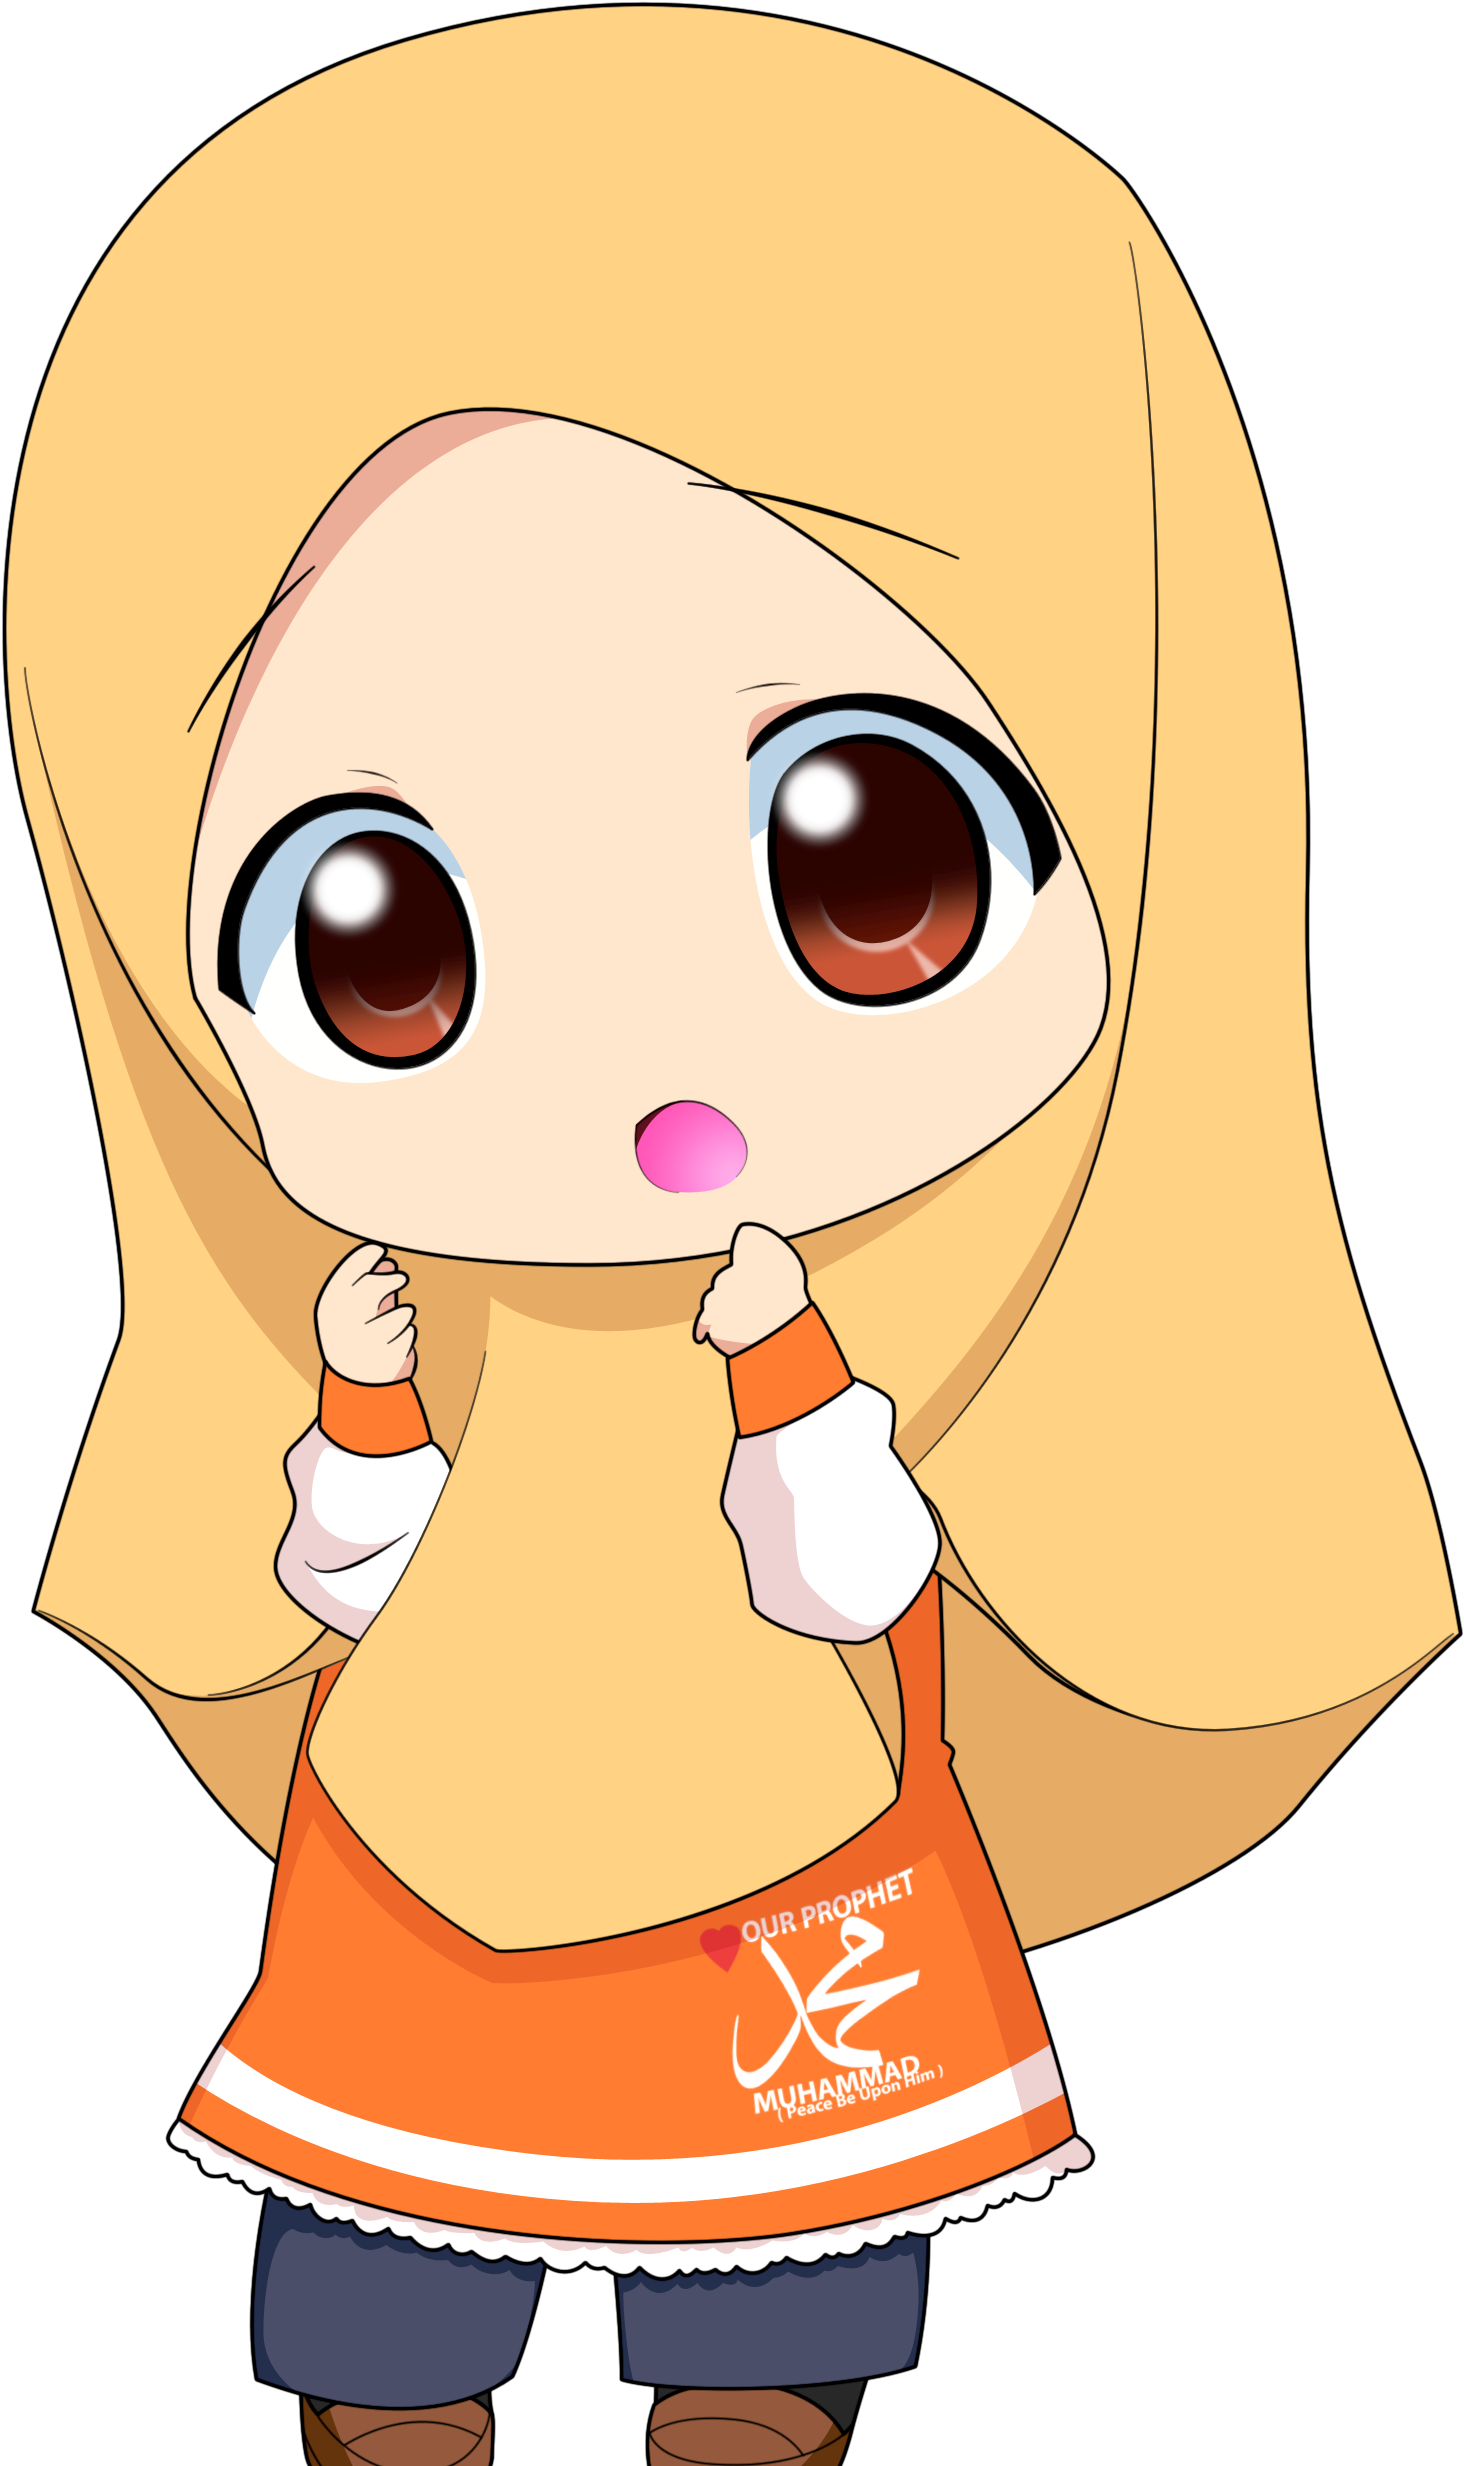 Best Images About Anime Muslim On Pinterest Muslim - Anime Muslimah Chibi (2894x2894)